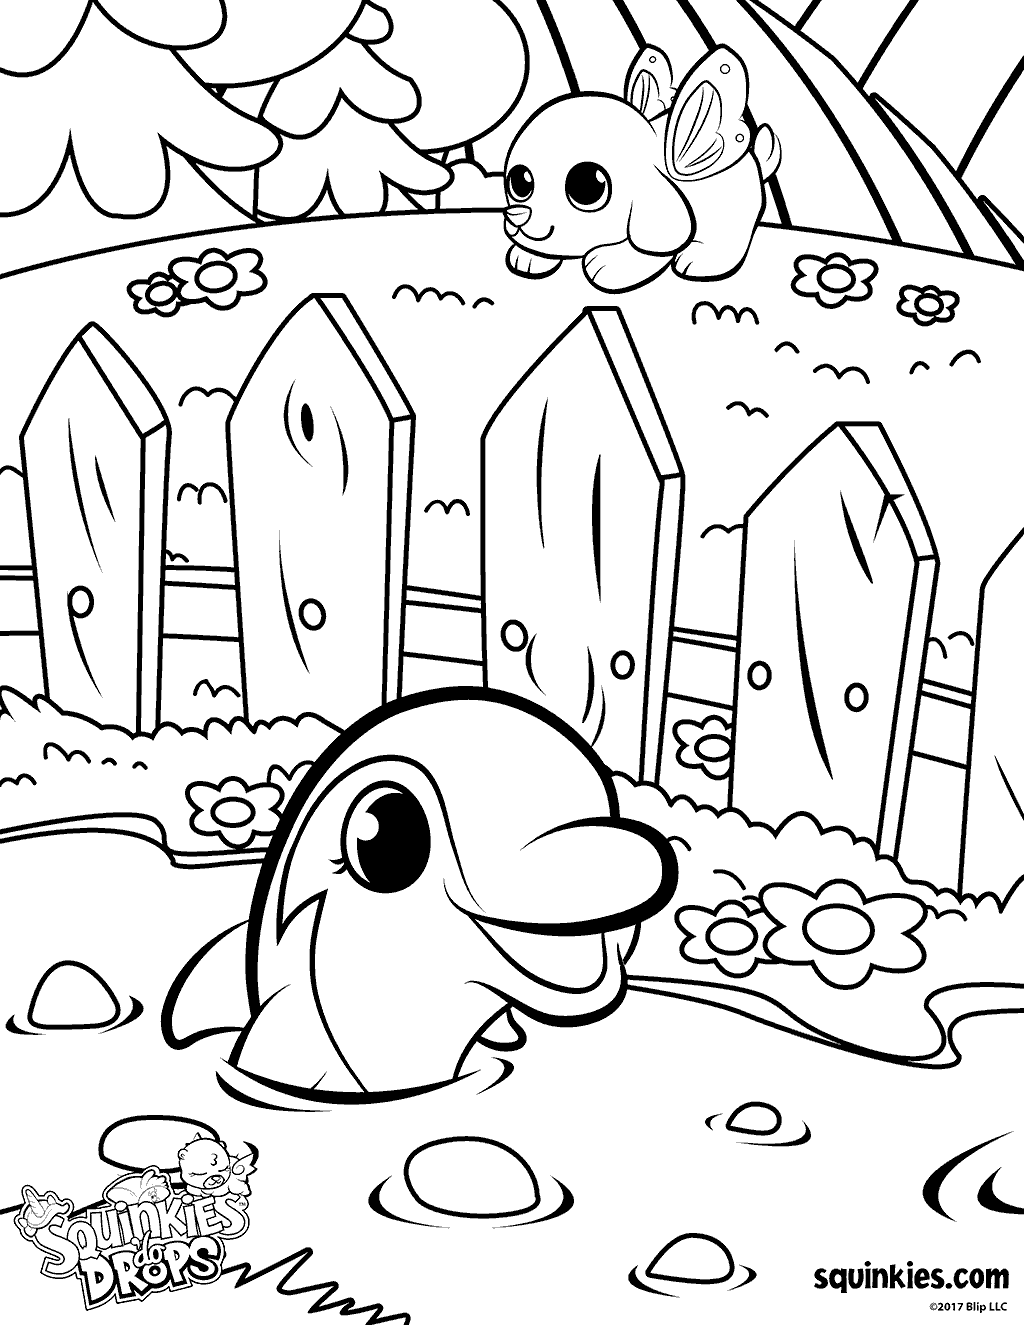 Squinkies Coloring Page Squinkieville Clubhouse - Get Coloring Pages